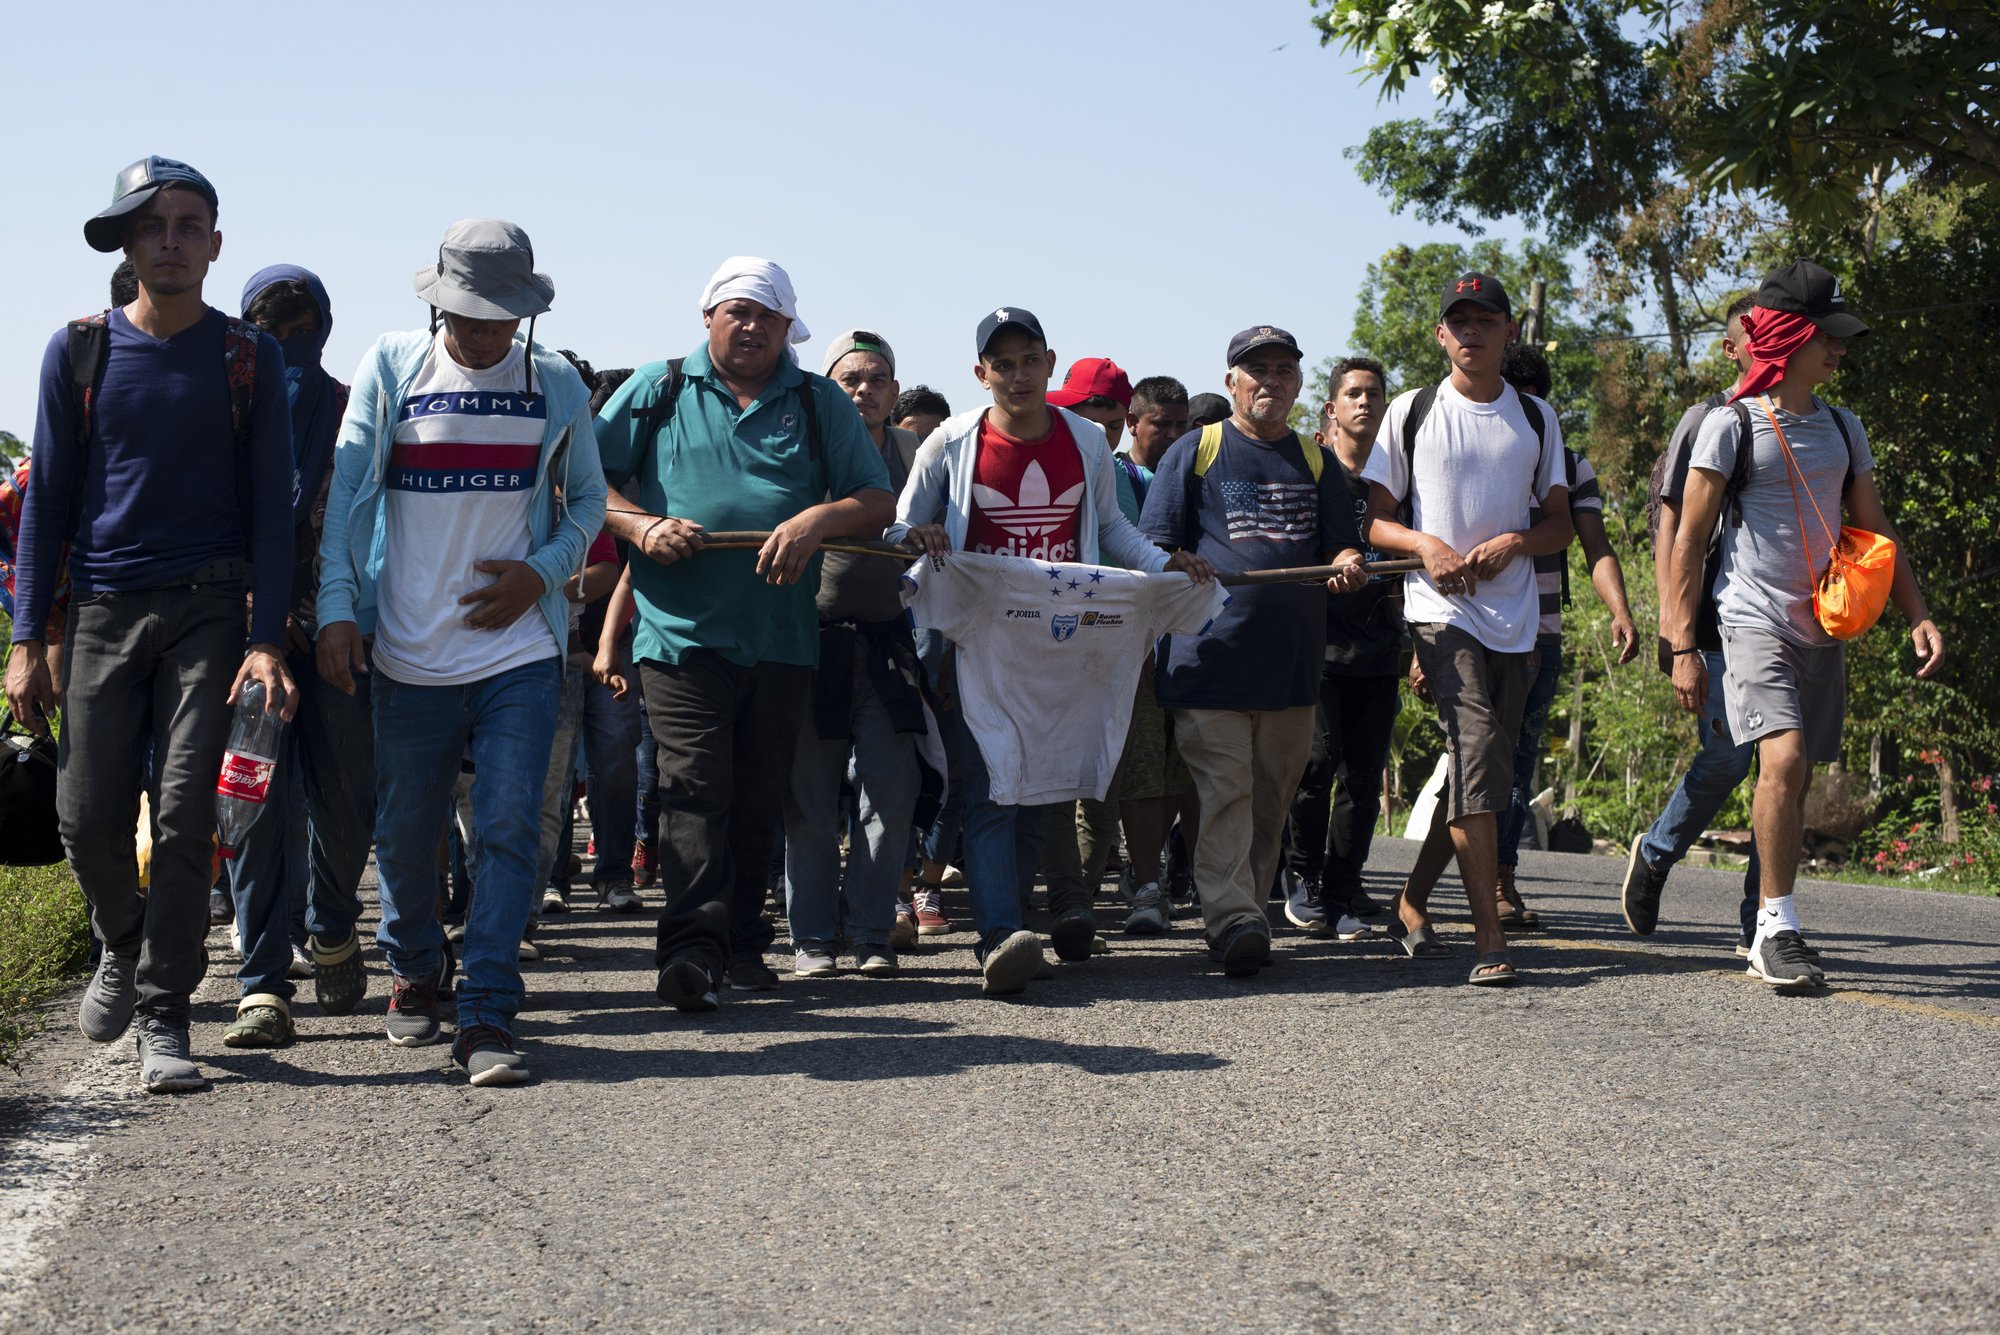 Central American migrants, part of a caravan hoping to reach the U.S. border, walk on a road in Frontera Hidalgo, Mexico, Friday, April 12, 2019. The group pushed past police guarding the bridge and joined a larger group of about 2,000 migrants who are walking toward Tapachula, the latest caravan to enter Mexico. (AP Photo/Isabel Mateos)